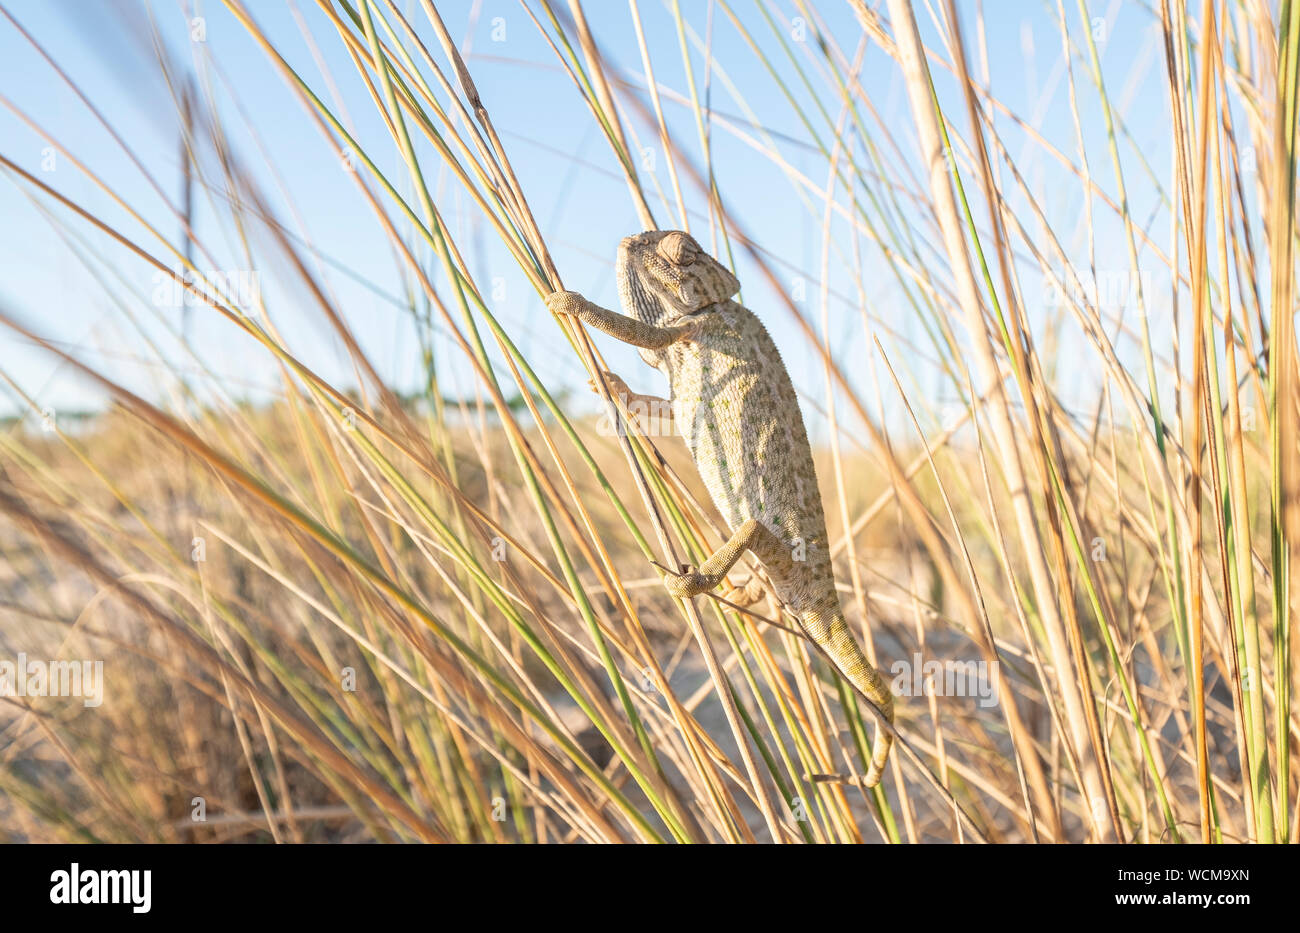 chameleon climbing branches in a beach area Stock Photo